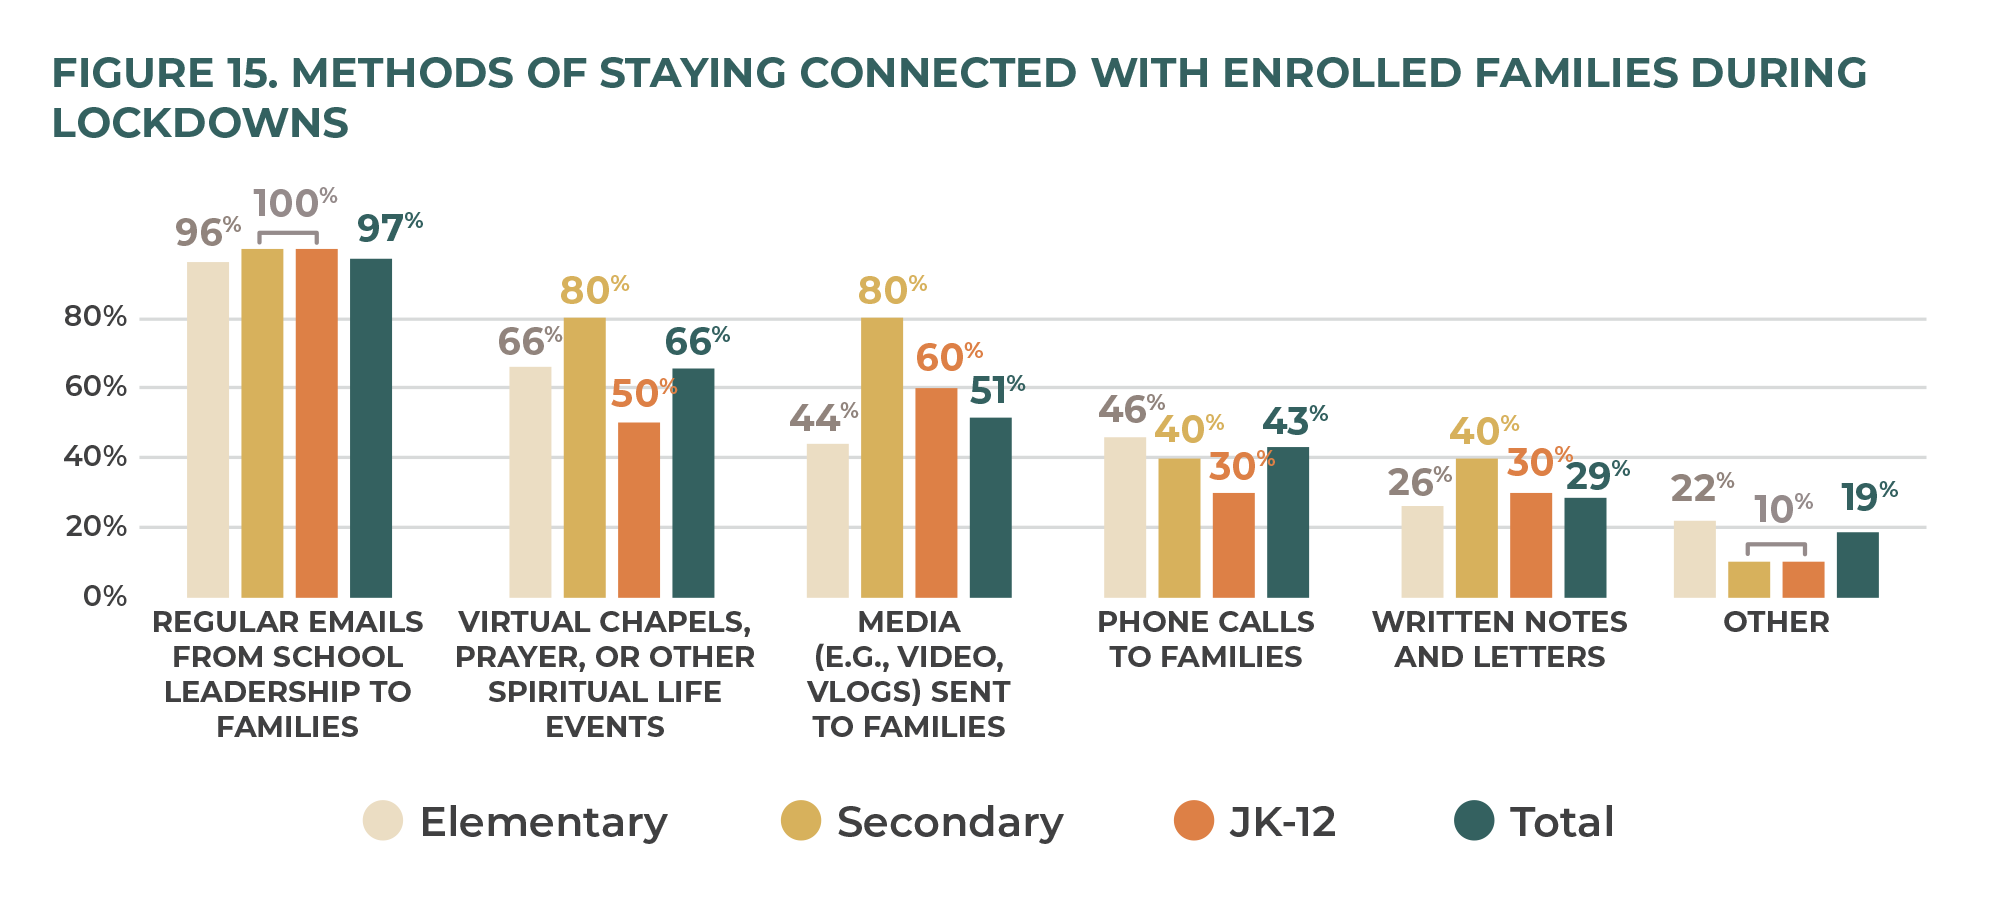 Figure 15. Methods of Staying Connected with Enrolled Families During Lockdowns.